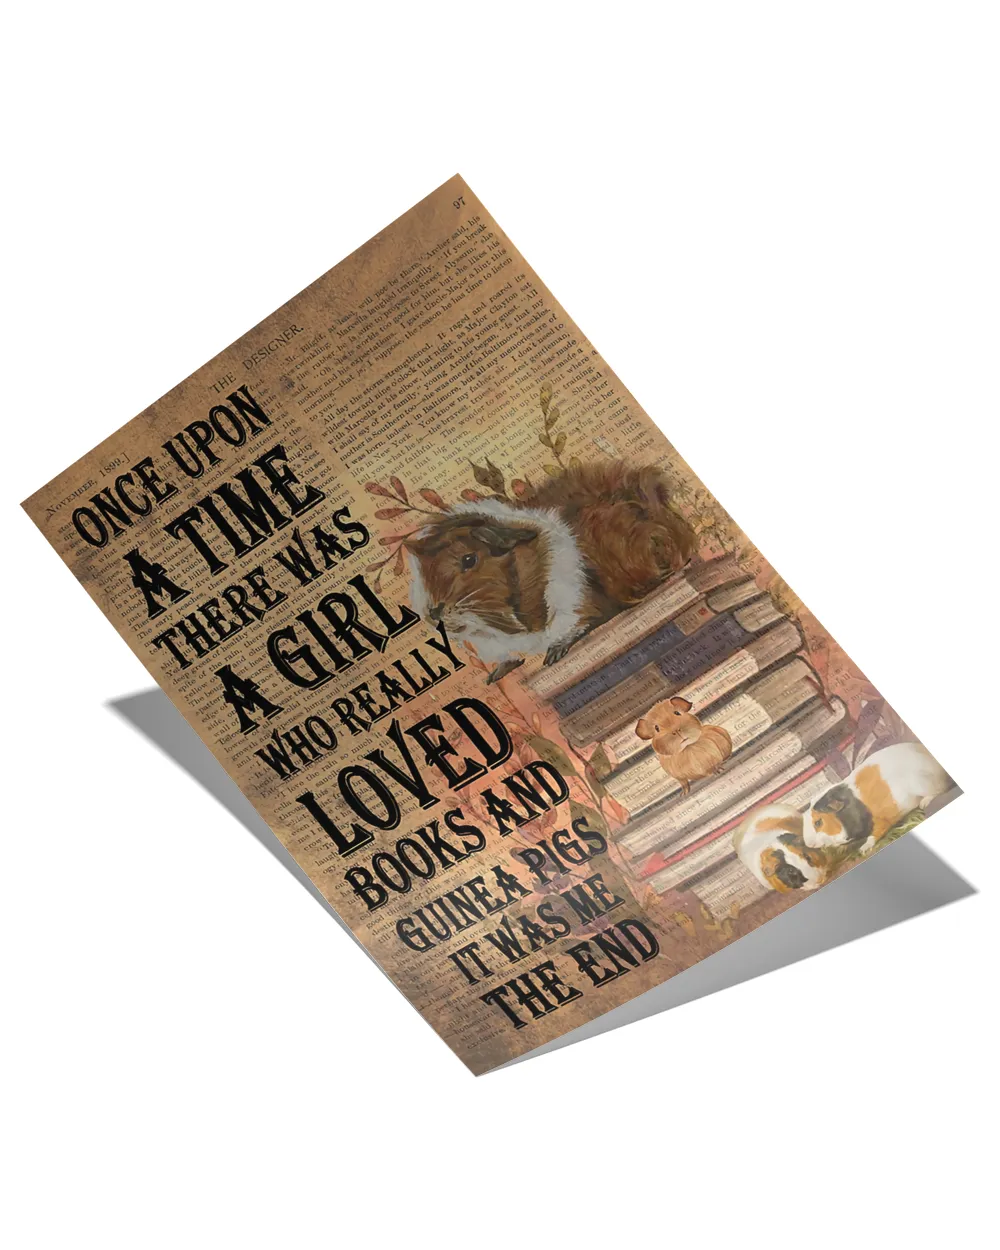 There was A Girl Who Loved Guinea Pigs and Books Poster